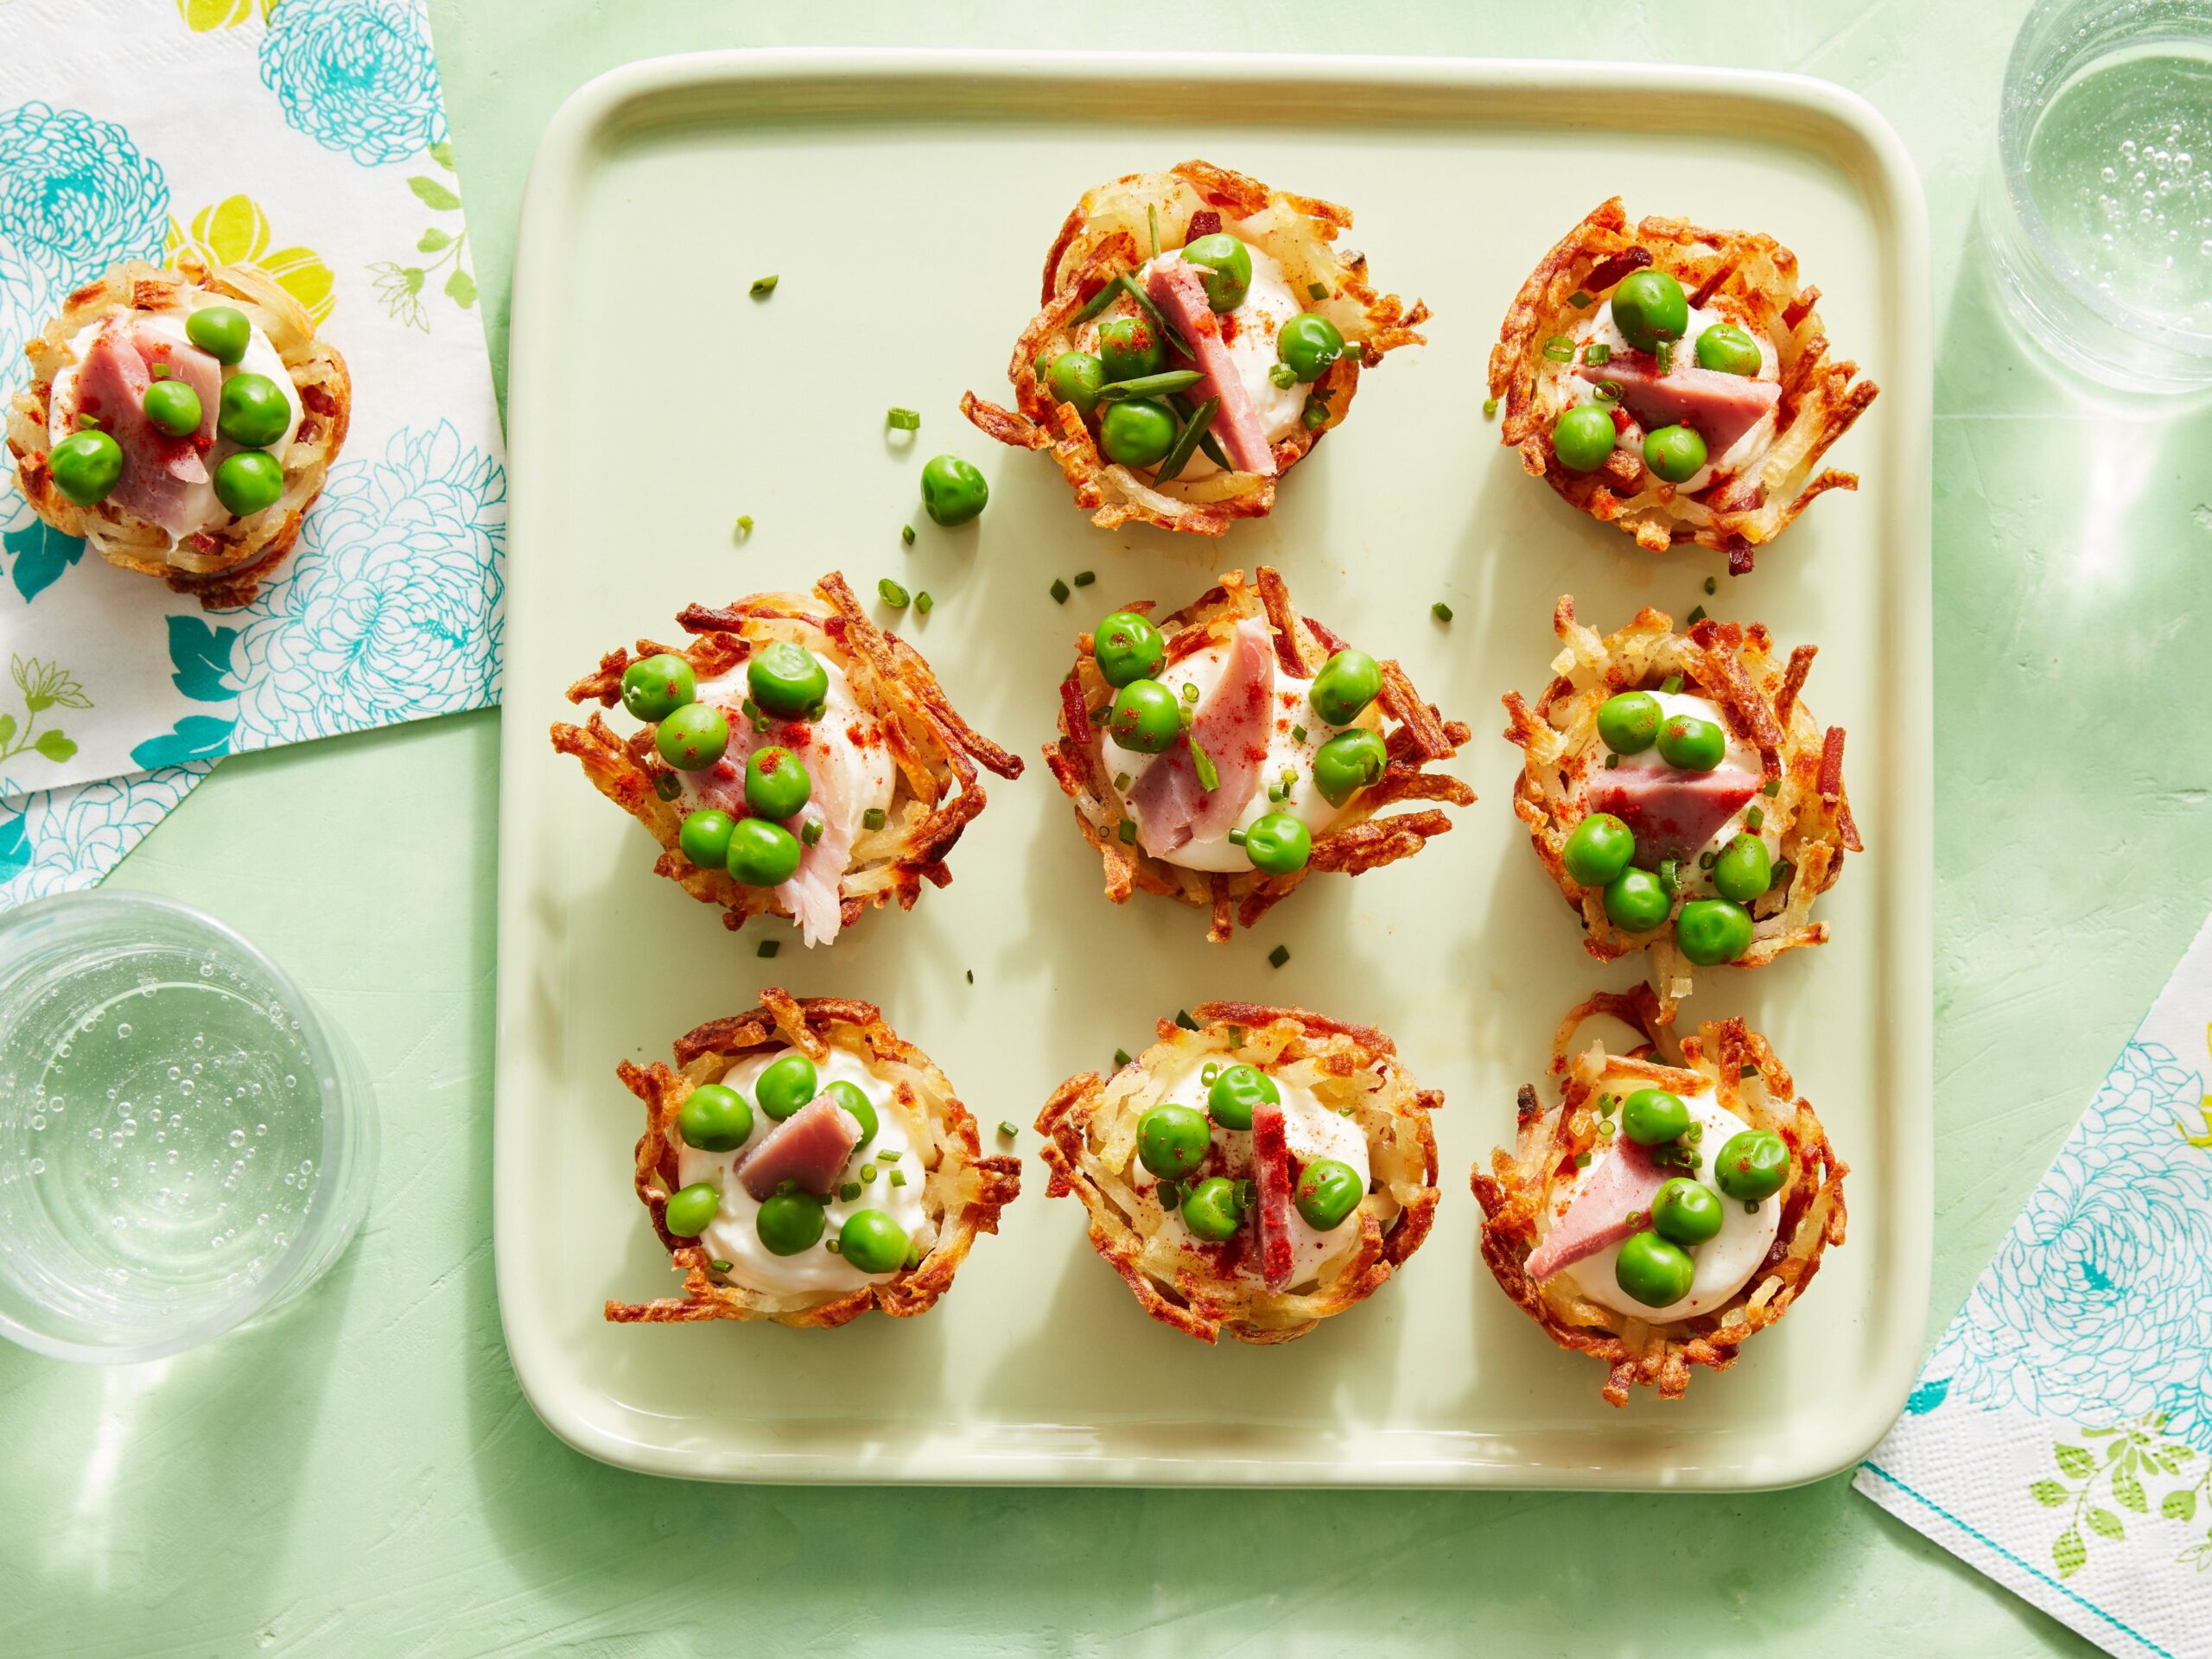 5 Easter appetizers that make hosting a breeze - Food and Cooking - News